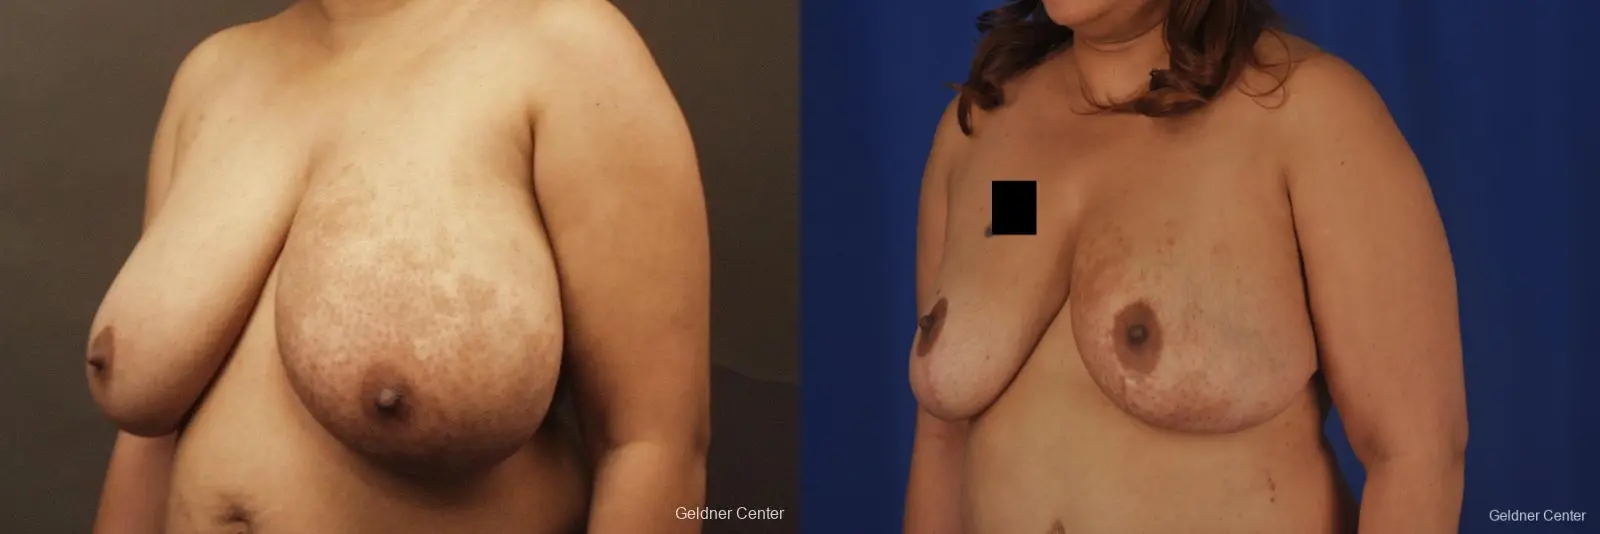 Chicago Breast Reduction 2375 - Before and After 4